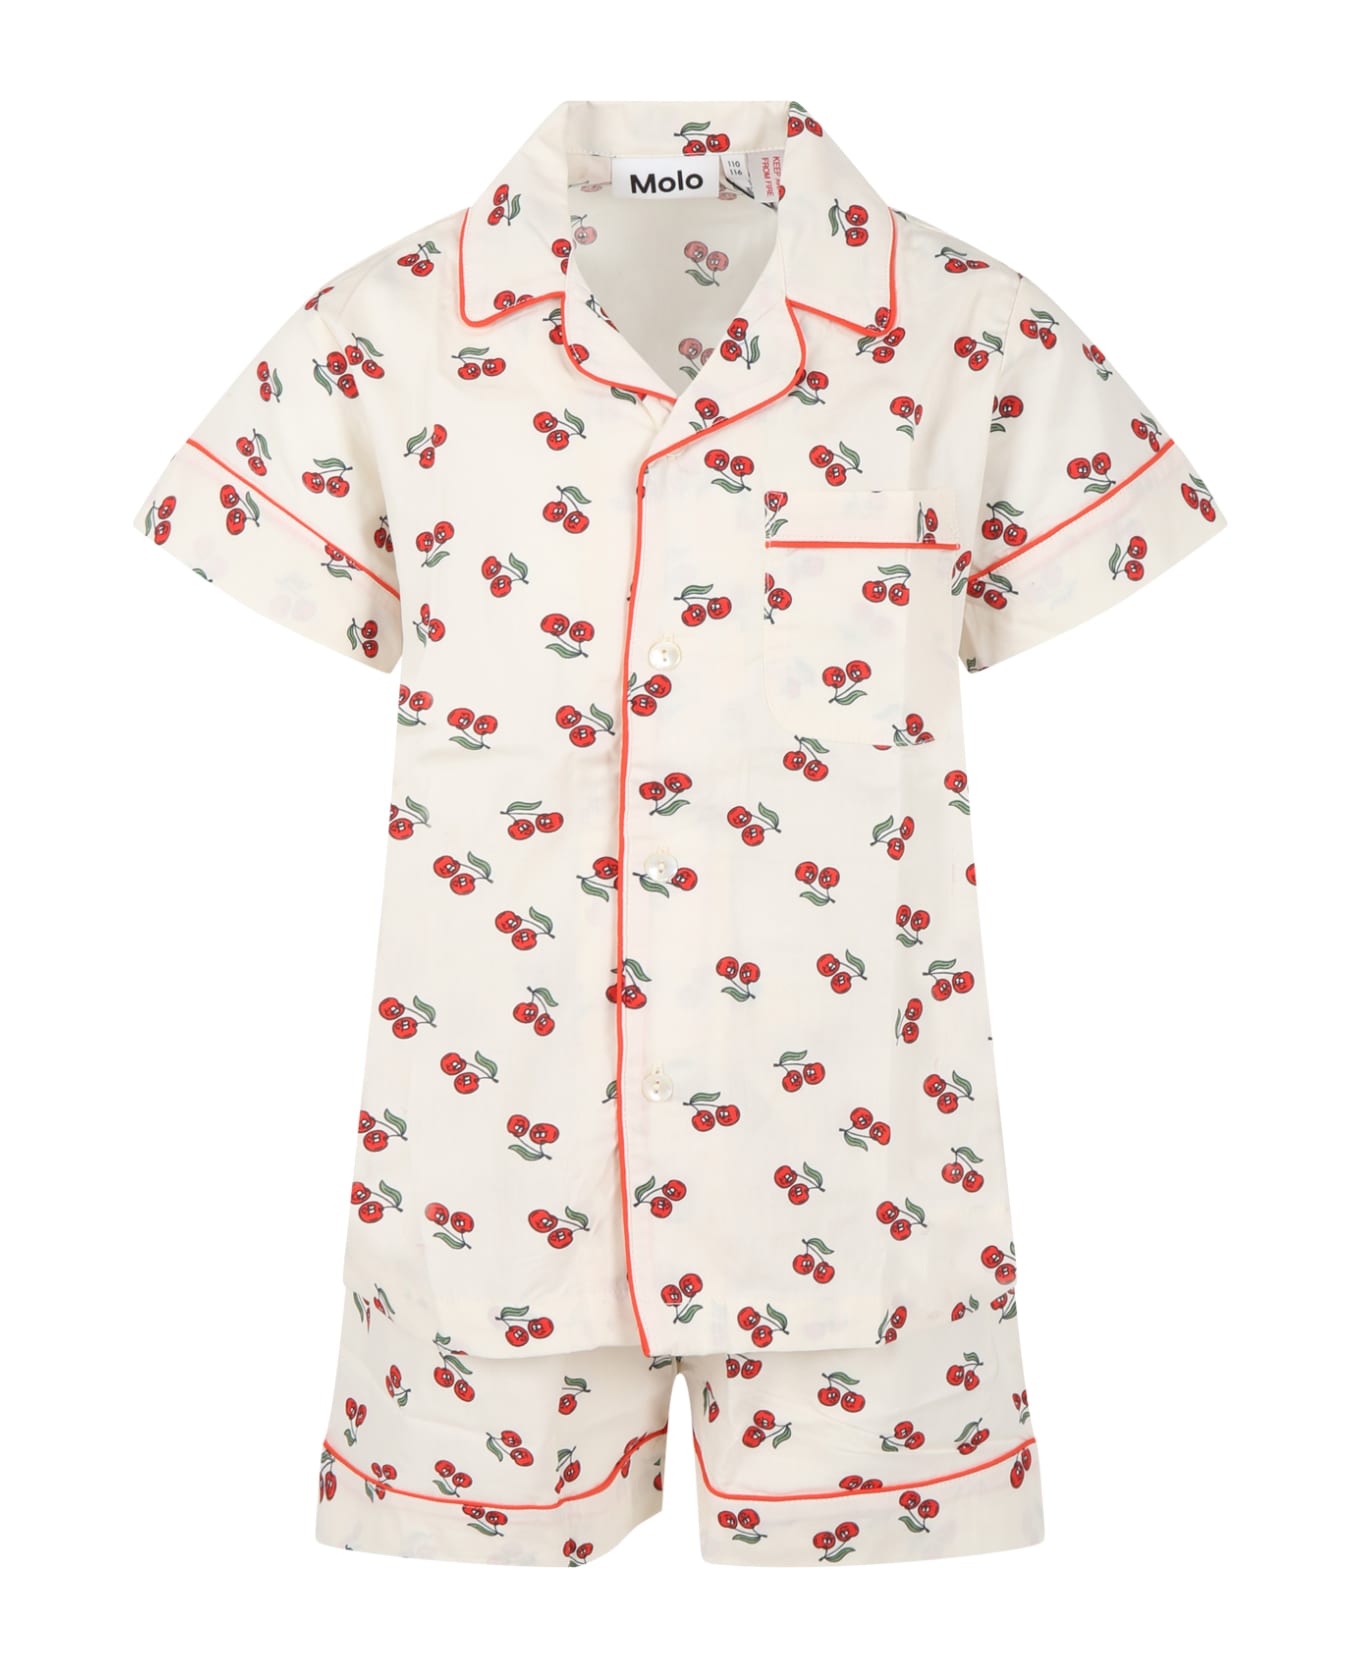 Molo Ivory Pajamas For Girl With Red Cherries - White